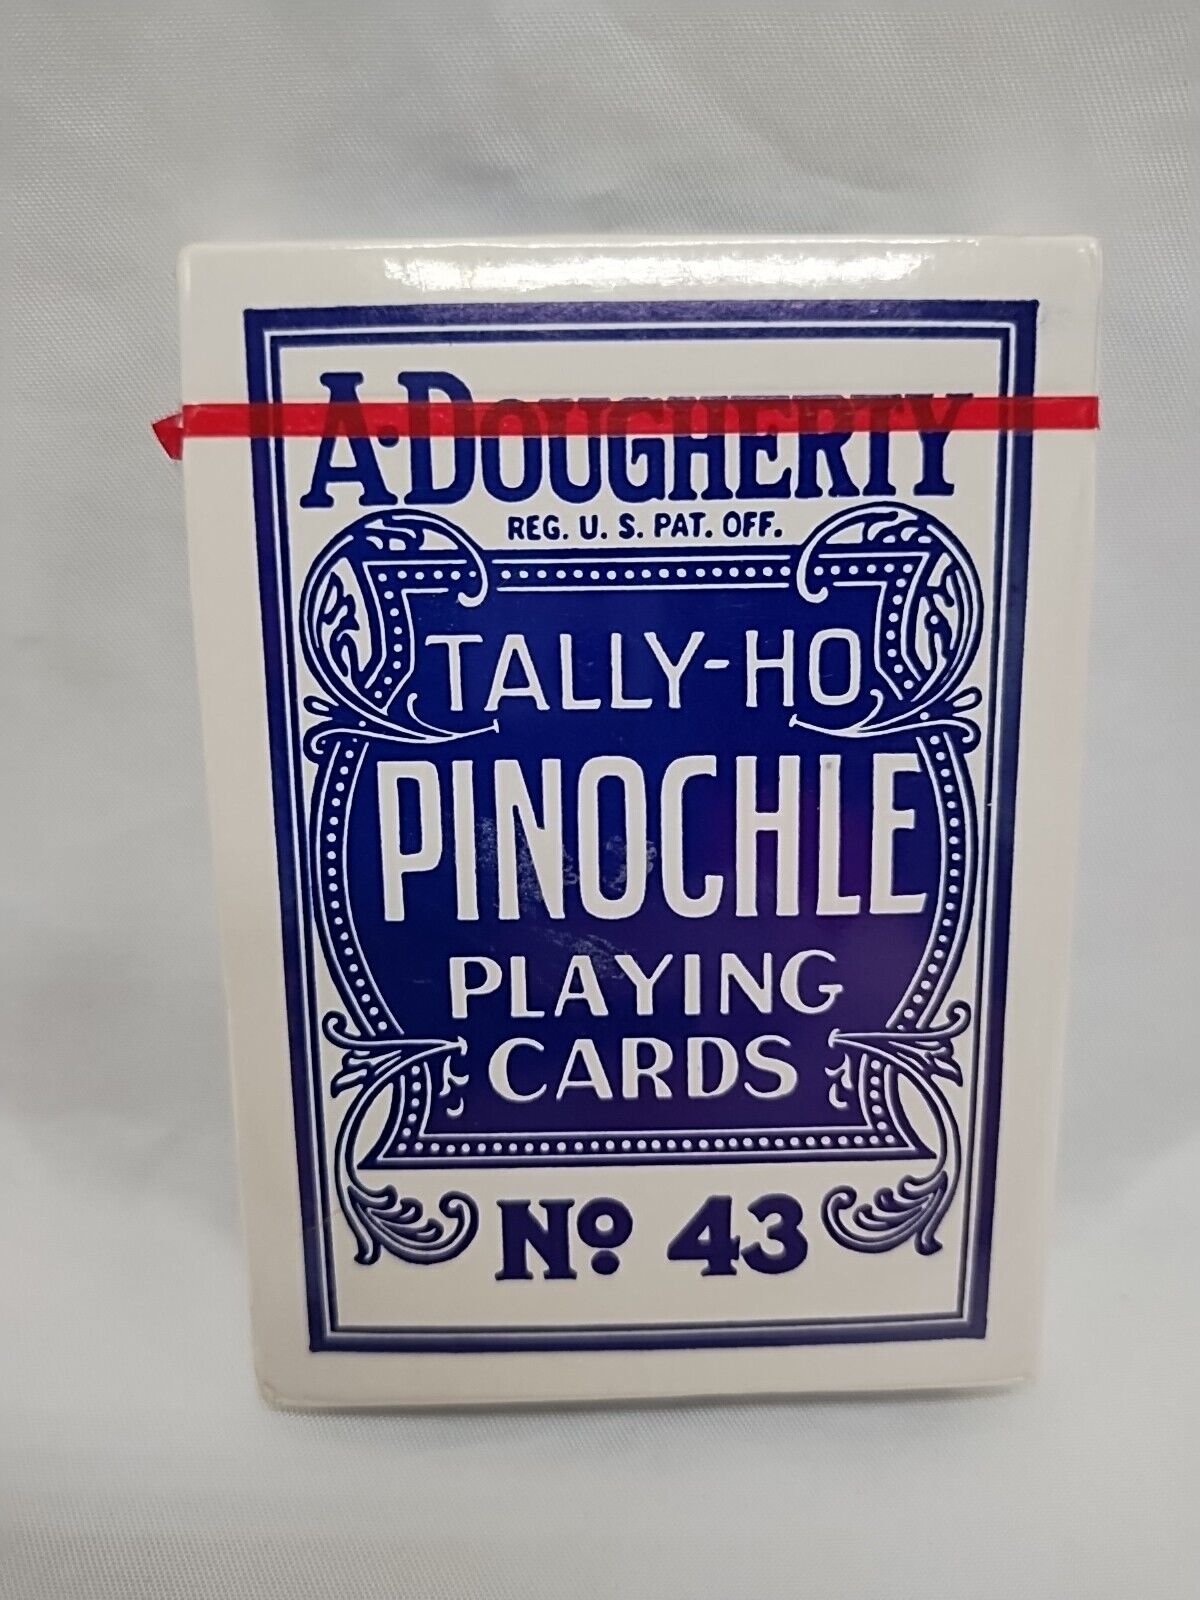 A Dougherty Tally-Ho Pinochle Playing Cards No 43 Deck Sealed